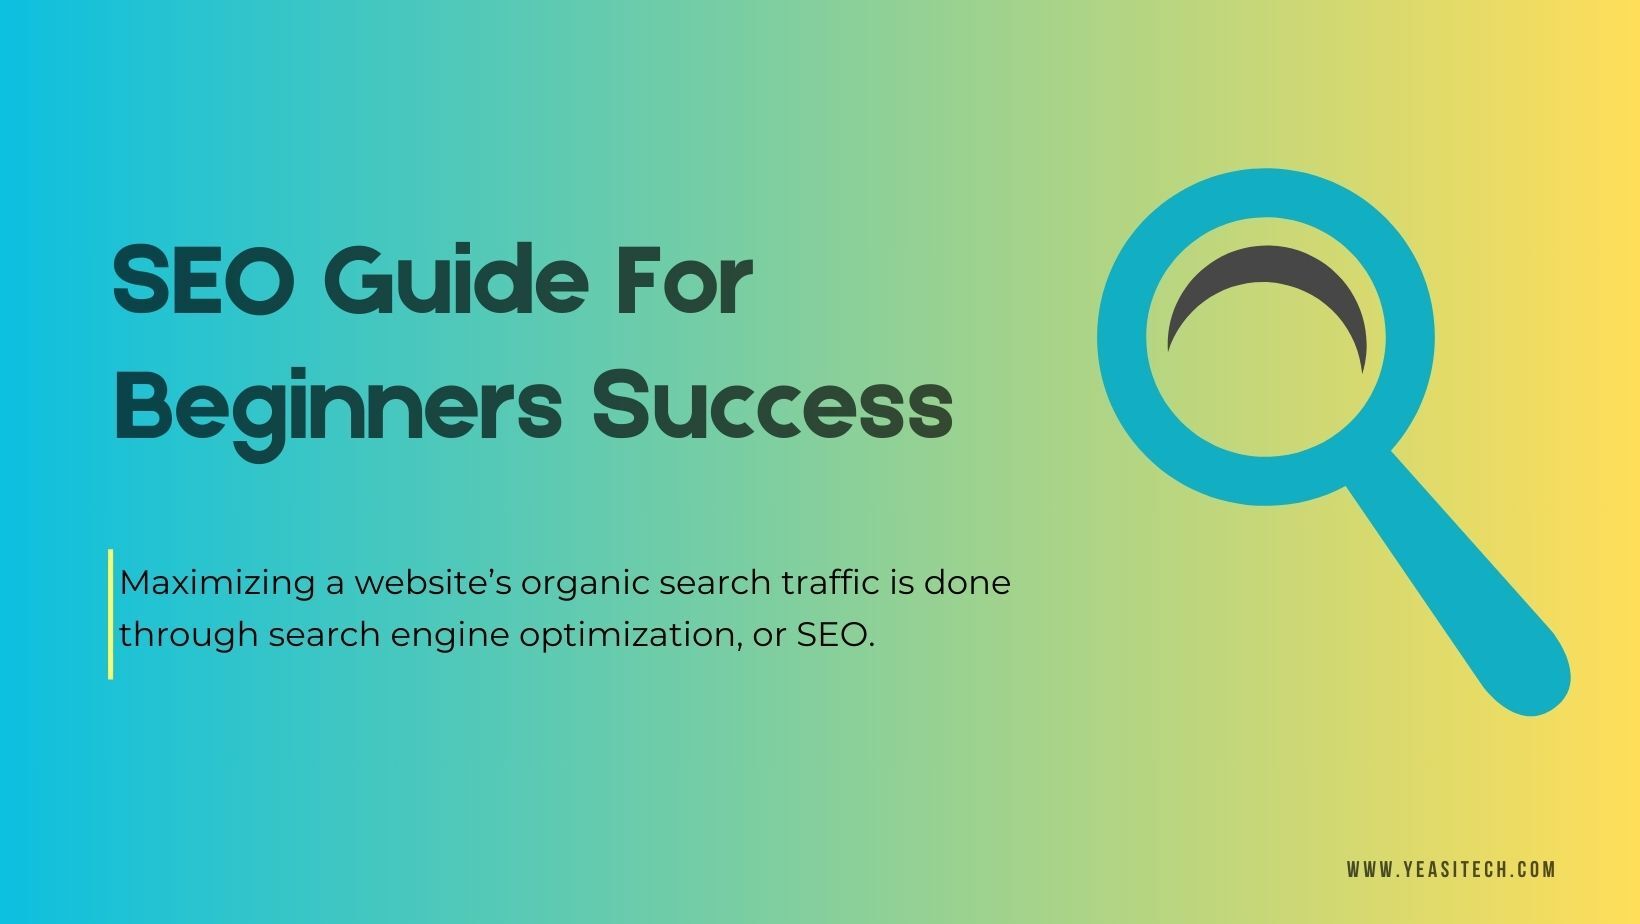 SEO Guide For Beginners